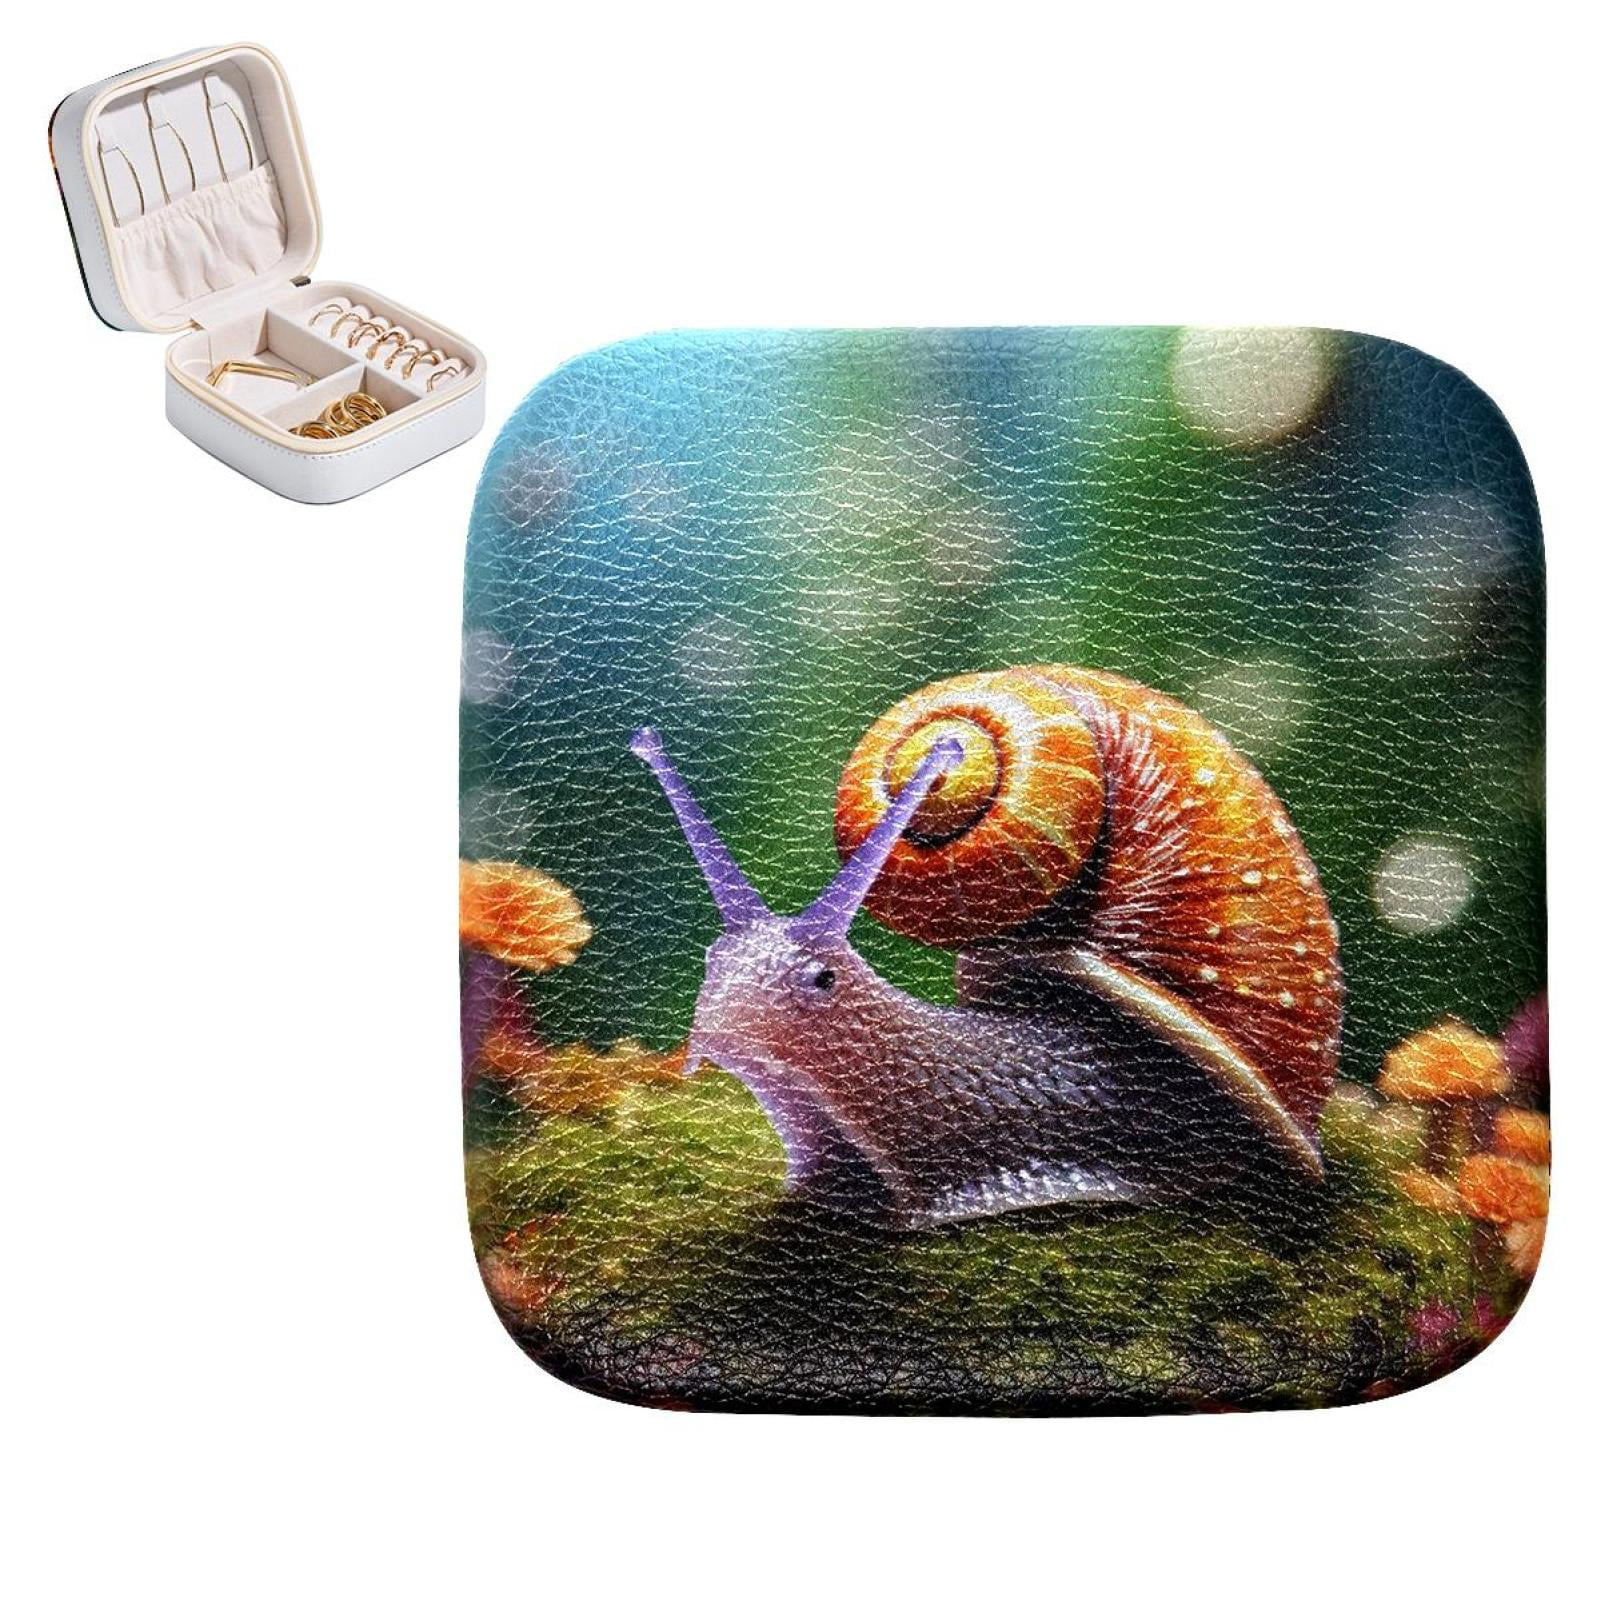 Snail Portable Square Jewelry Box: Ideal for Rings, Earrings, Necklaces ...